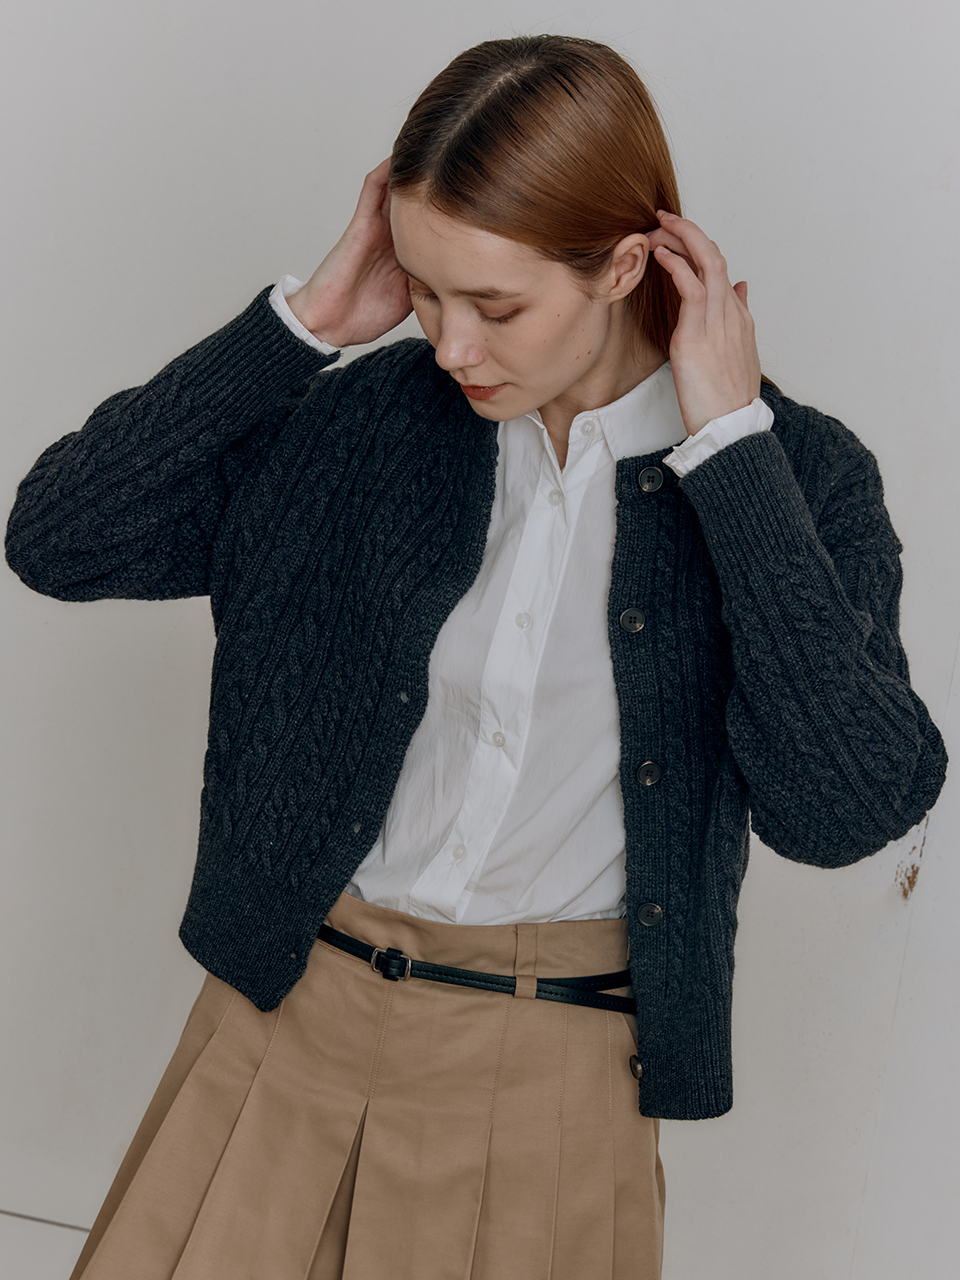 HACIE - WOOL CABLE KNIT CARDIGAN [3컬러]